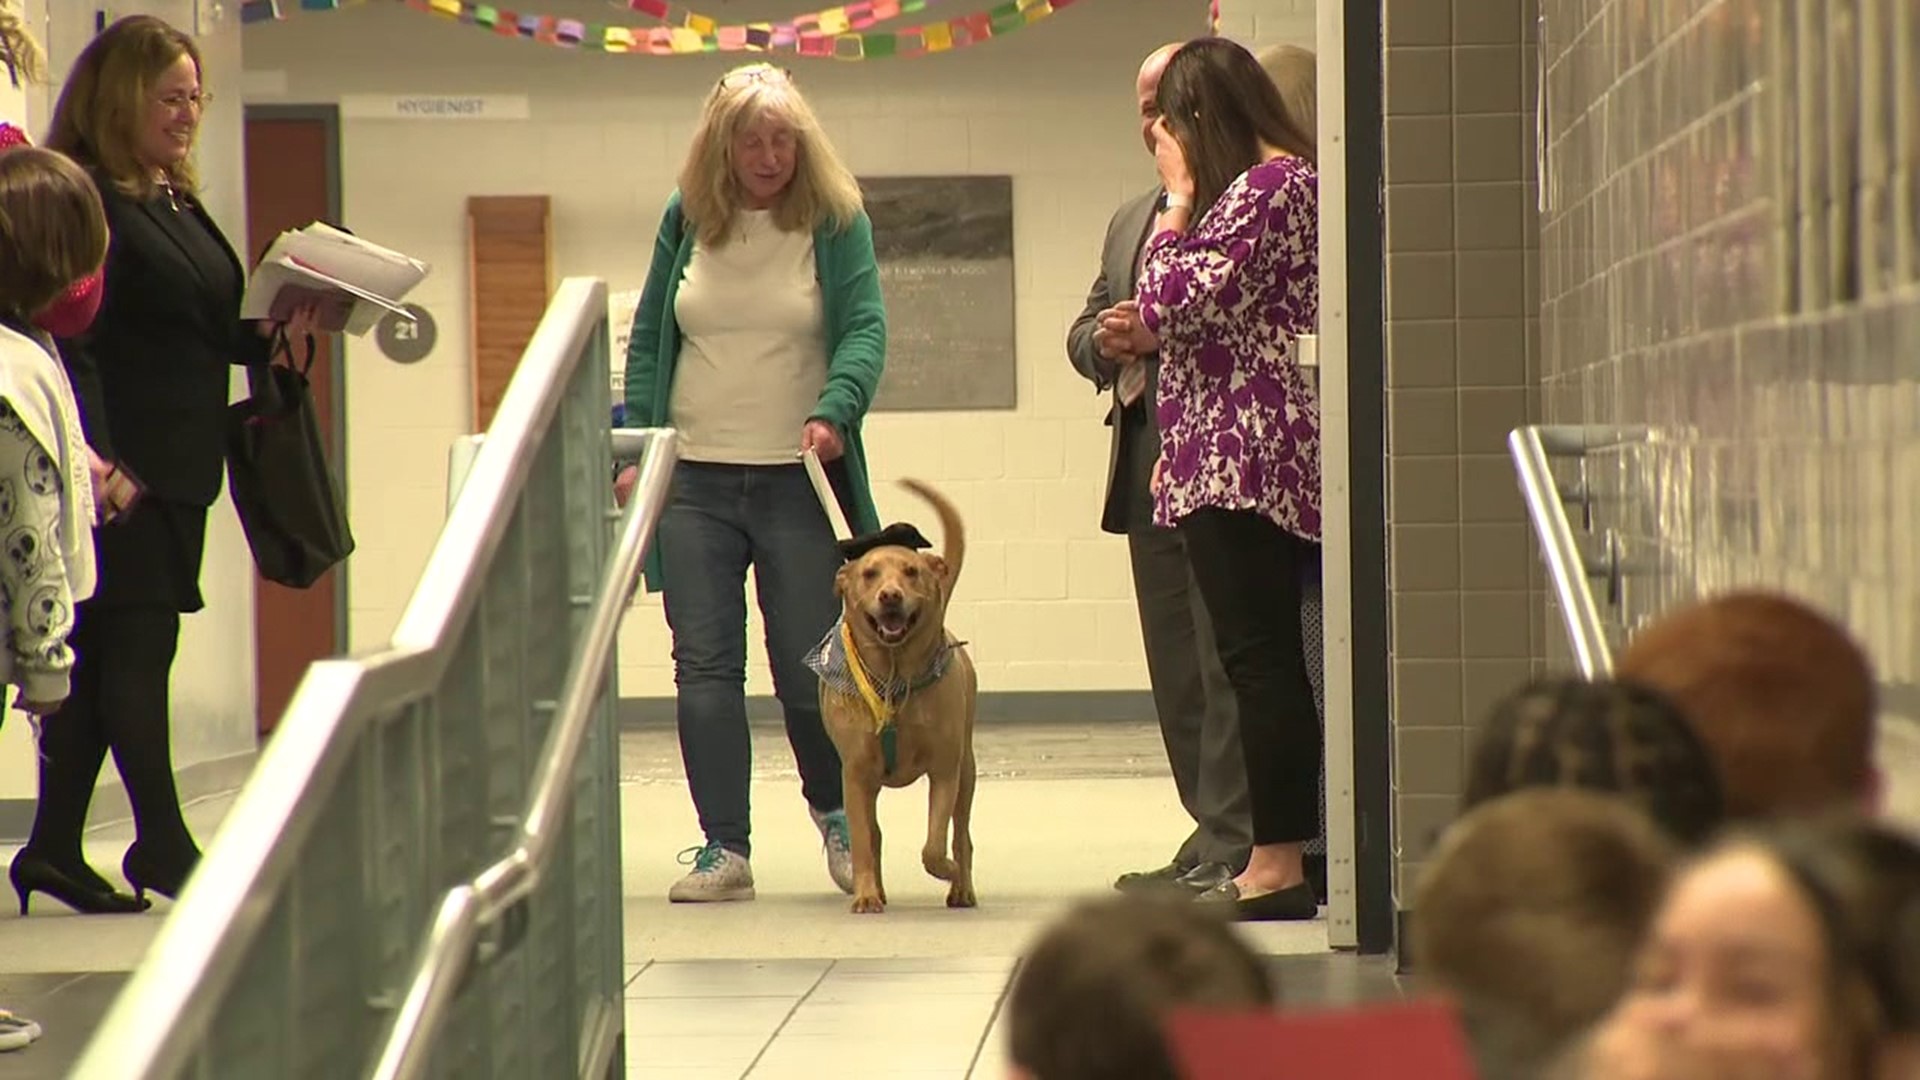 A school district in the Poconos is welcoming a new addition to its classrooms. Newswatch 16's Emily Kress introduces us to Toby, the therapy dog.